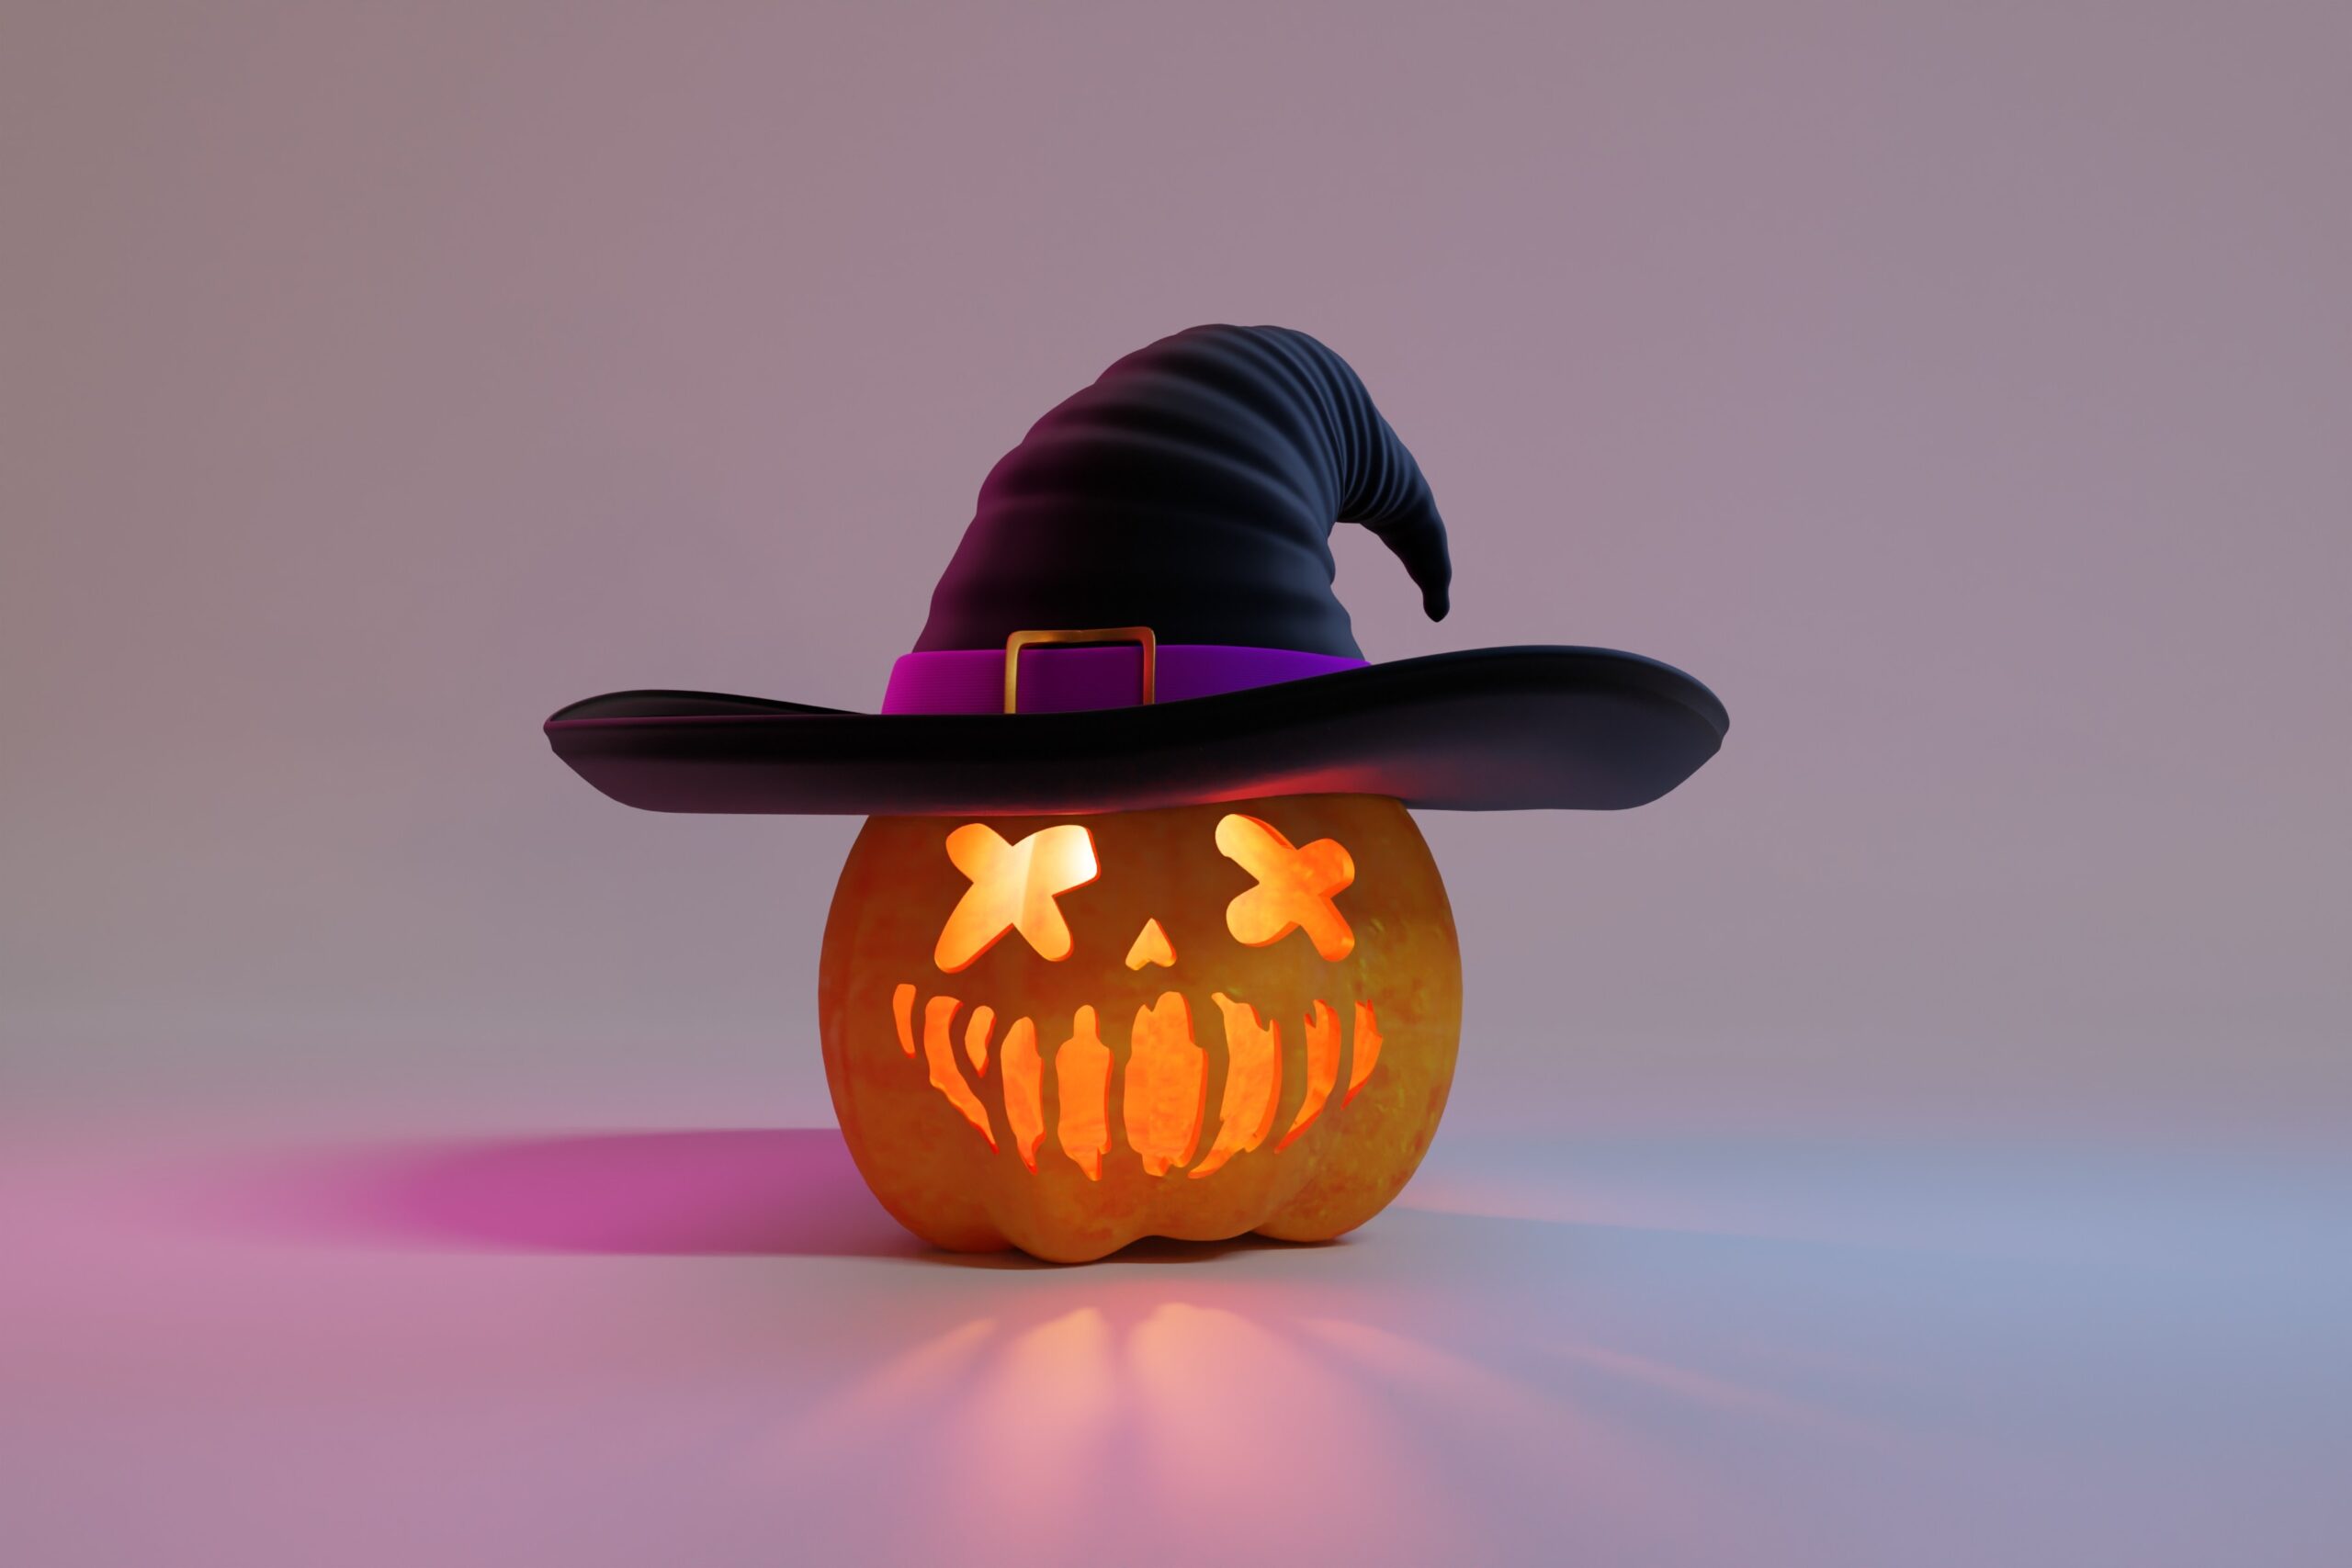 A pumpkin happy about halloween marketing ideas! An orange pumpkin wear a black witch hat is set against a purple background. It's eyes are alight from the candle.